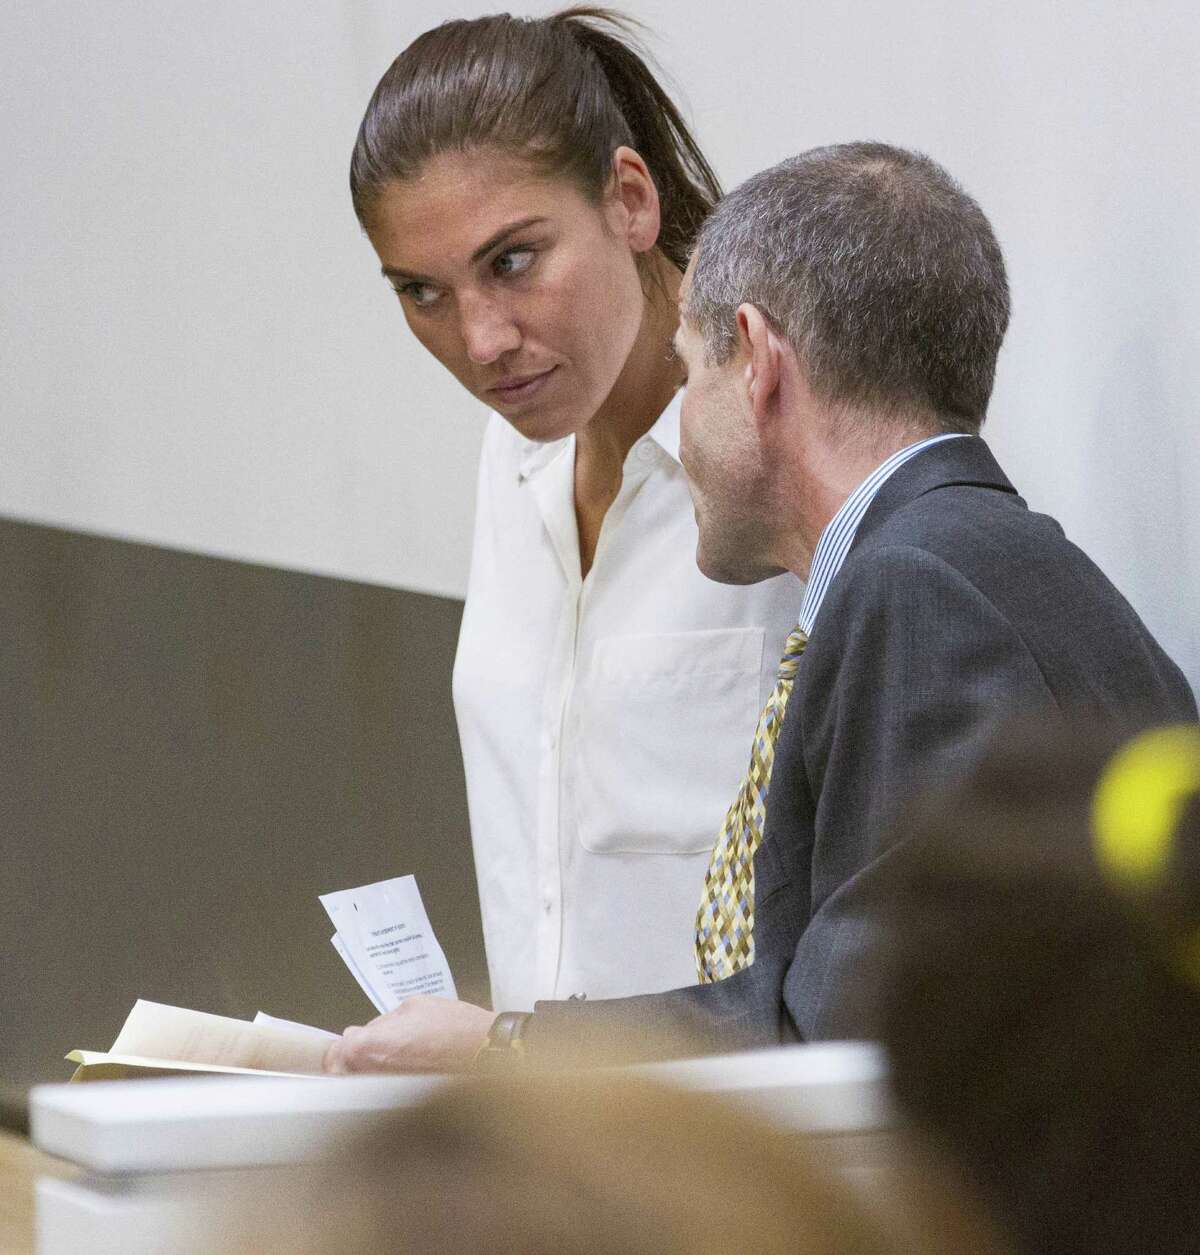 U.S. women's soccer team goalkeeper Hope Solo listens to her attorney Todd Maybrown in Kirkland Municipal Court on Monday, June 23, 2014, in Kirkland, Wash. Solo has entered a not guilty plea following her domestic violence arrest at her sister's home in suburban Seattle.